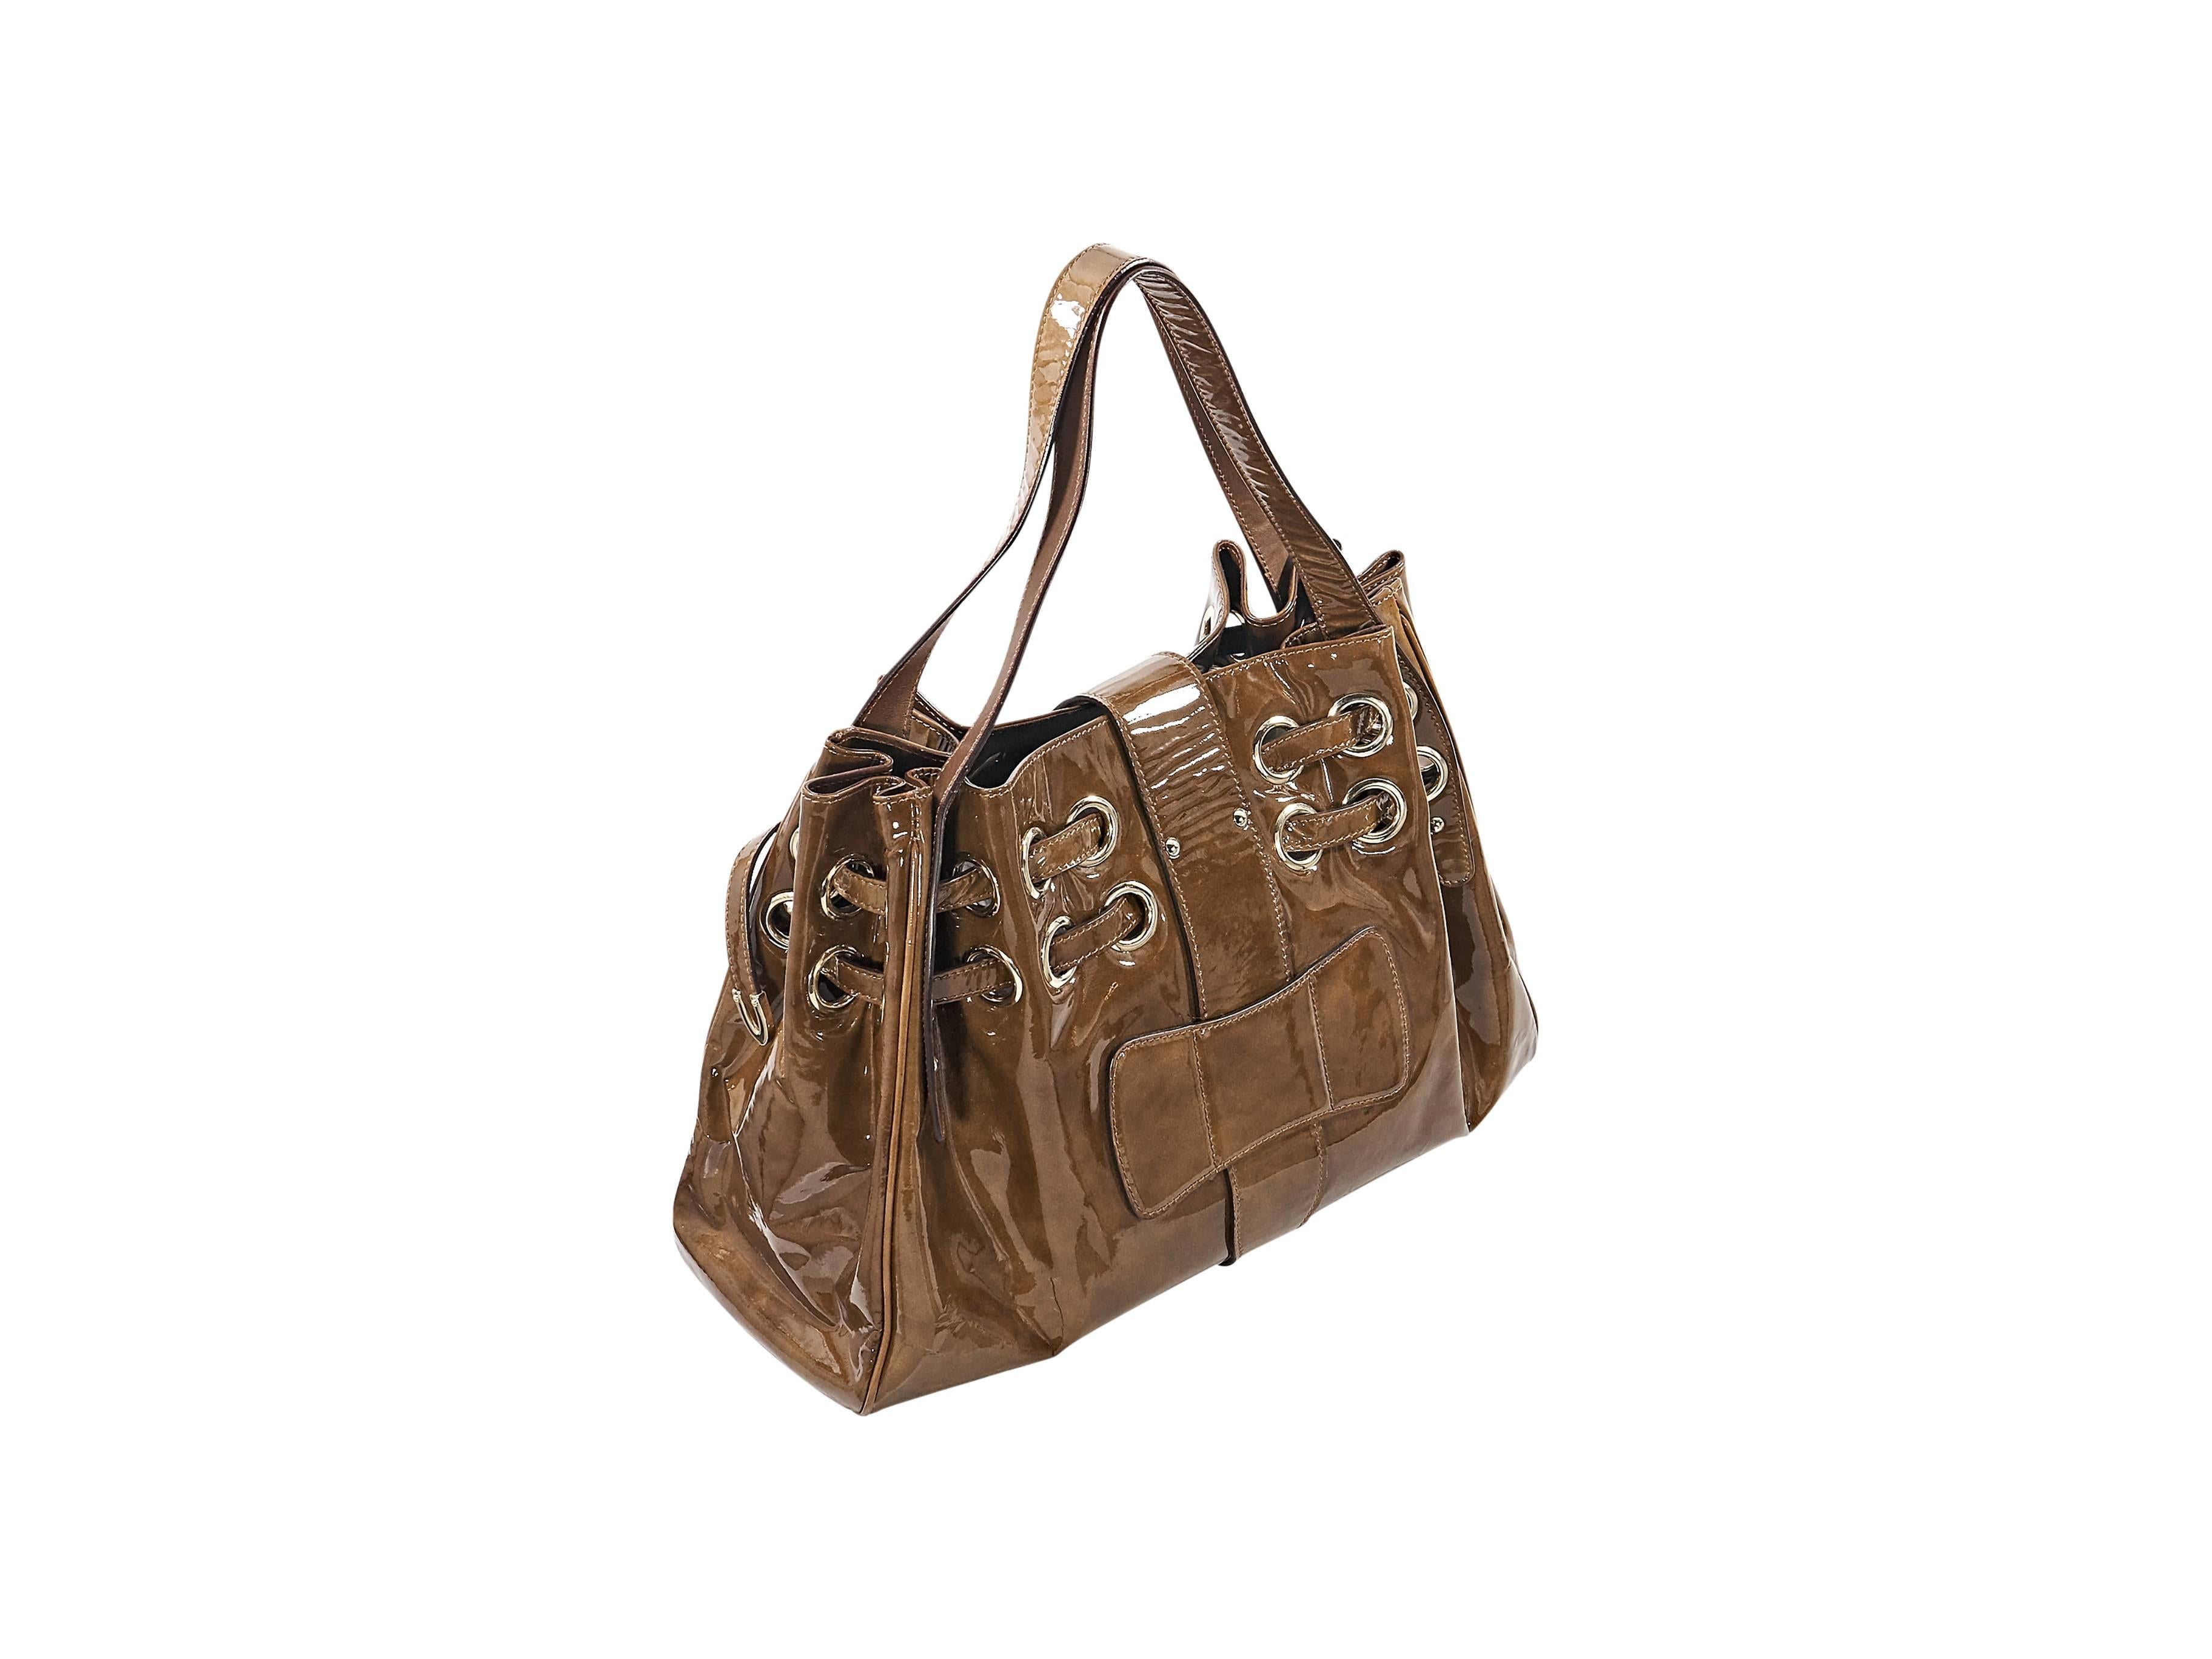 Product details: Brown patent leather 'Ramona' shoulder bag by Jimmy Choo. Dual shoulder straps. Flip-lock strap closure. Lined interior with inner zip pockets. Goldtone hardware. 16.5